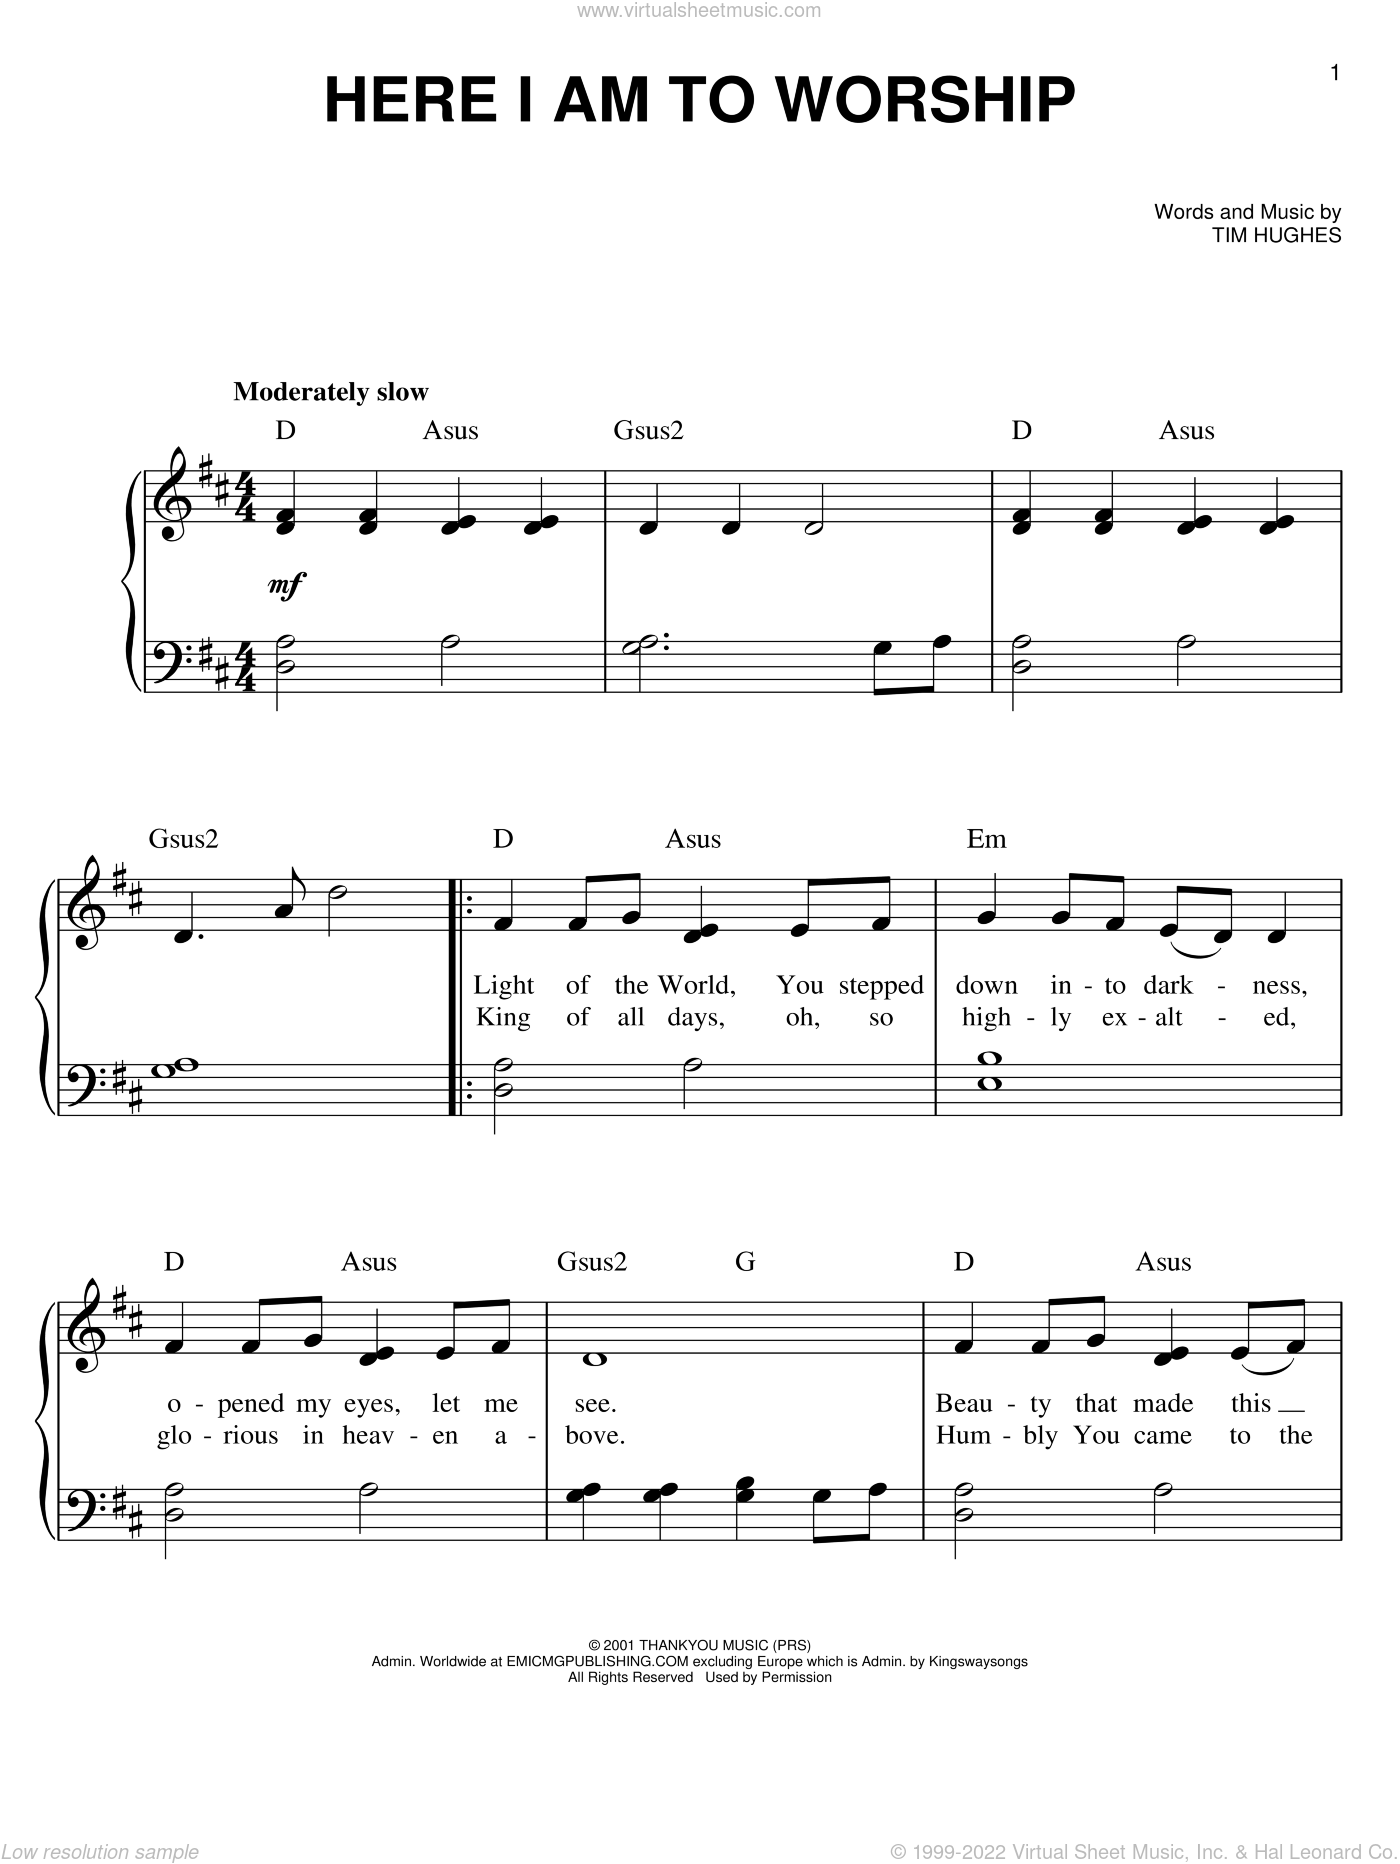 here-i-am-to-worship-sheet-music-easy-version-2-for-piano-solo